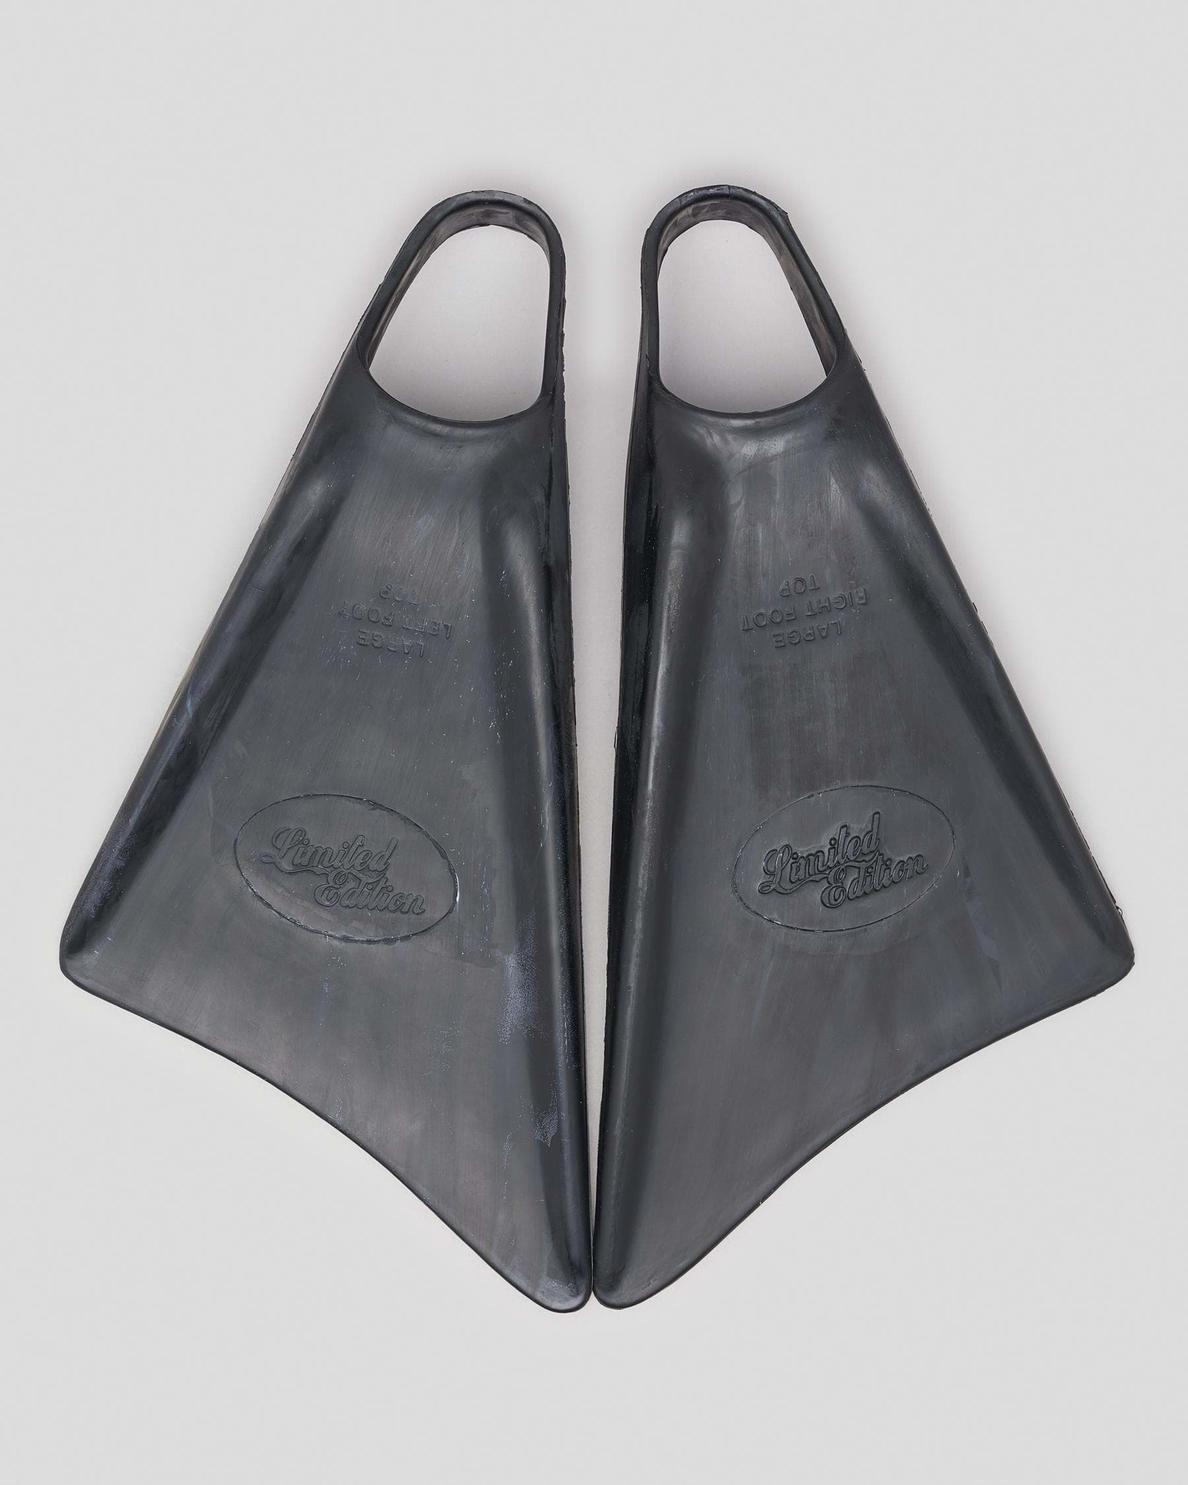 Limited Edition Surf Hardware
 Joe Clarke All Blacks Fin offers at $69.95 in City Beach